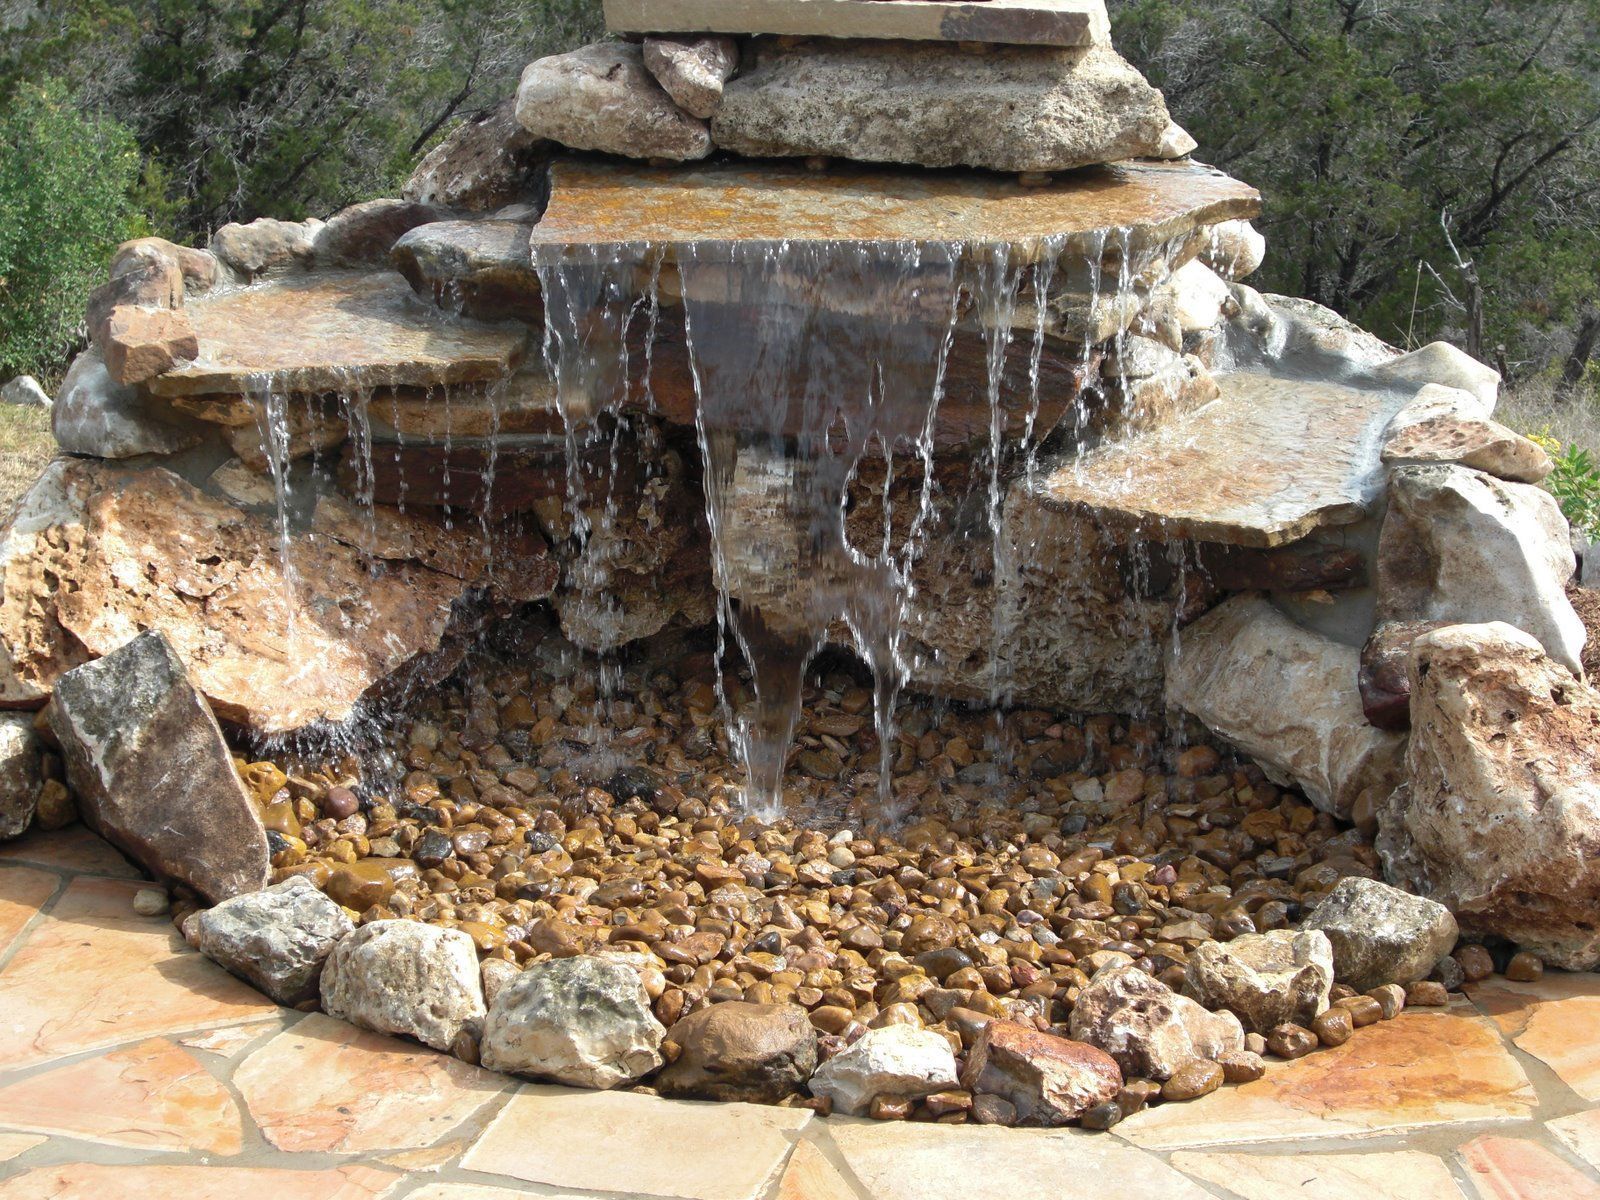 Directions for Installing a Pondless Waterfall Without Buying an Expensive Kit | Hunker -   21 garden design Wall backyard ideas